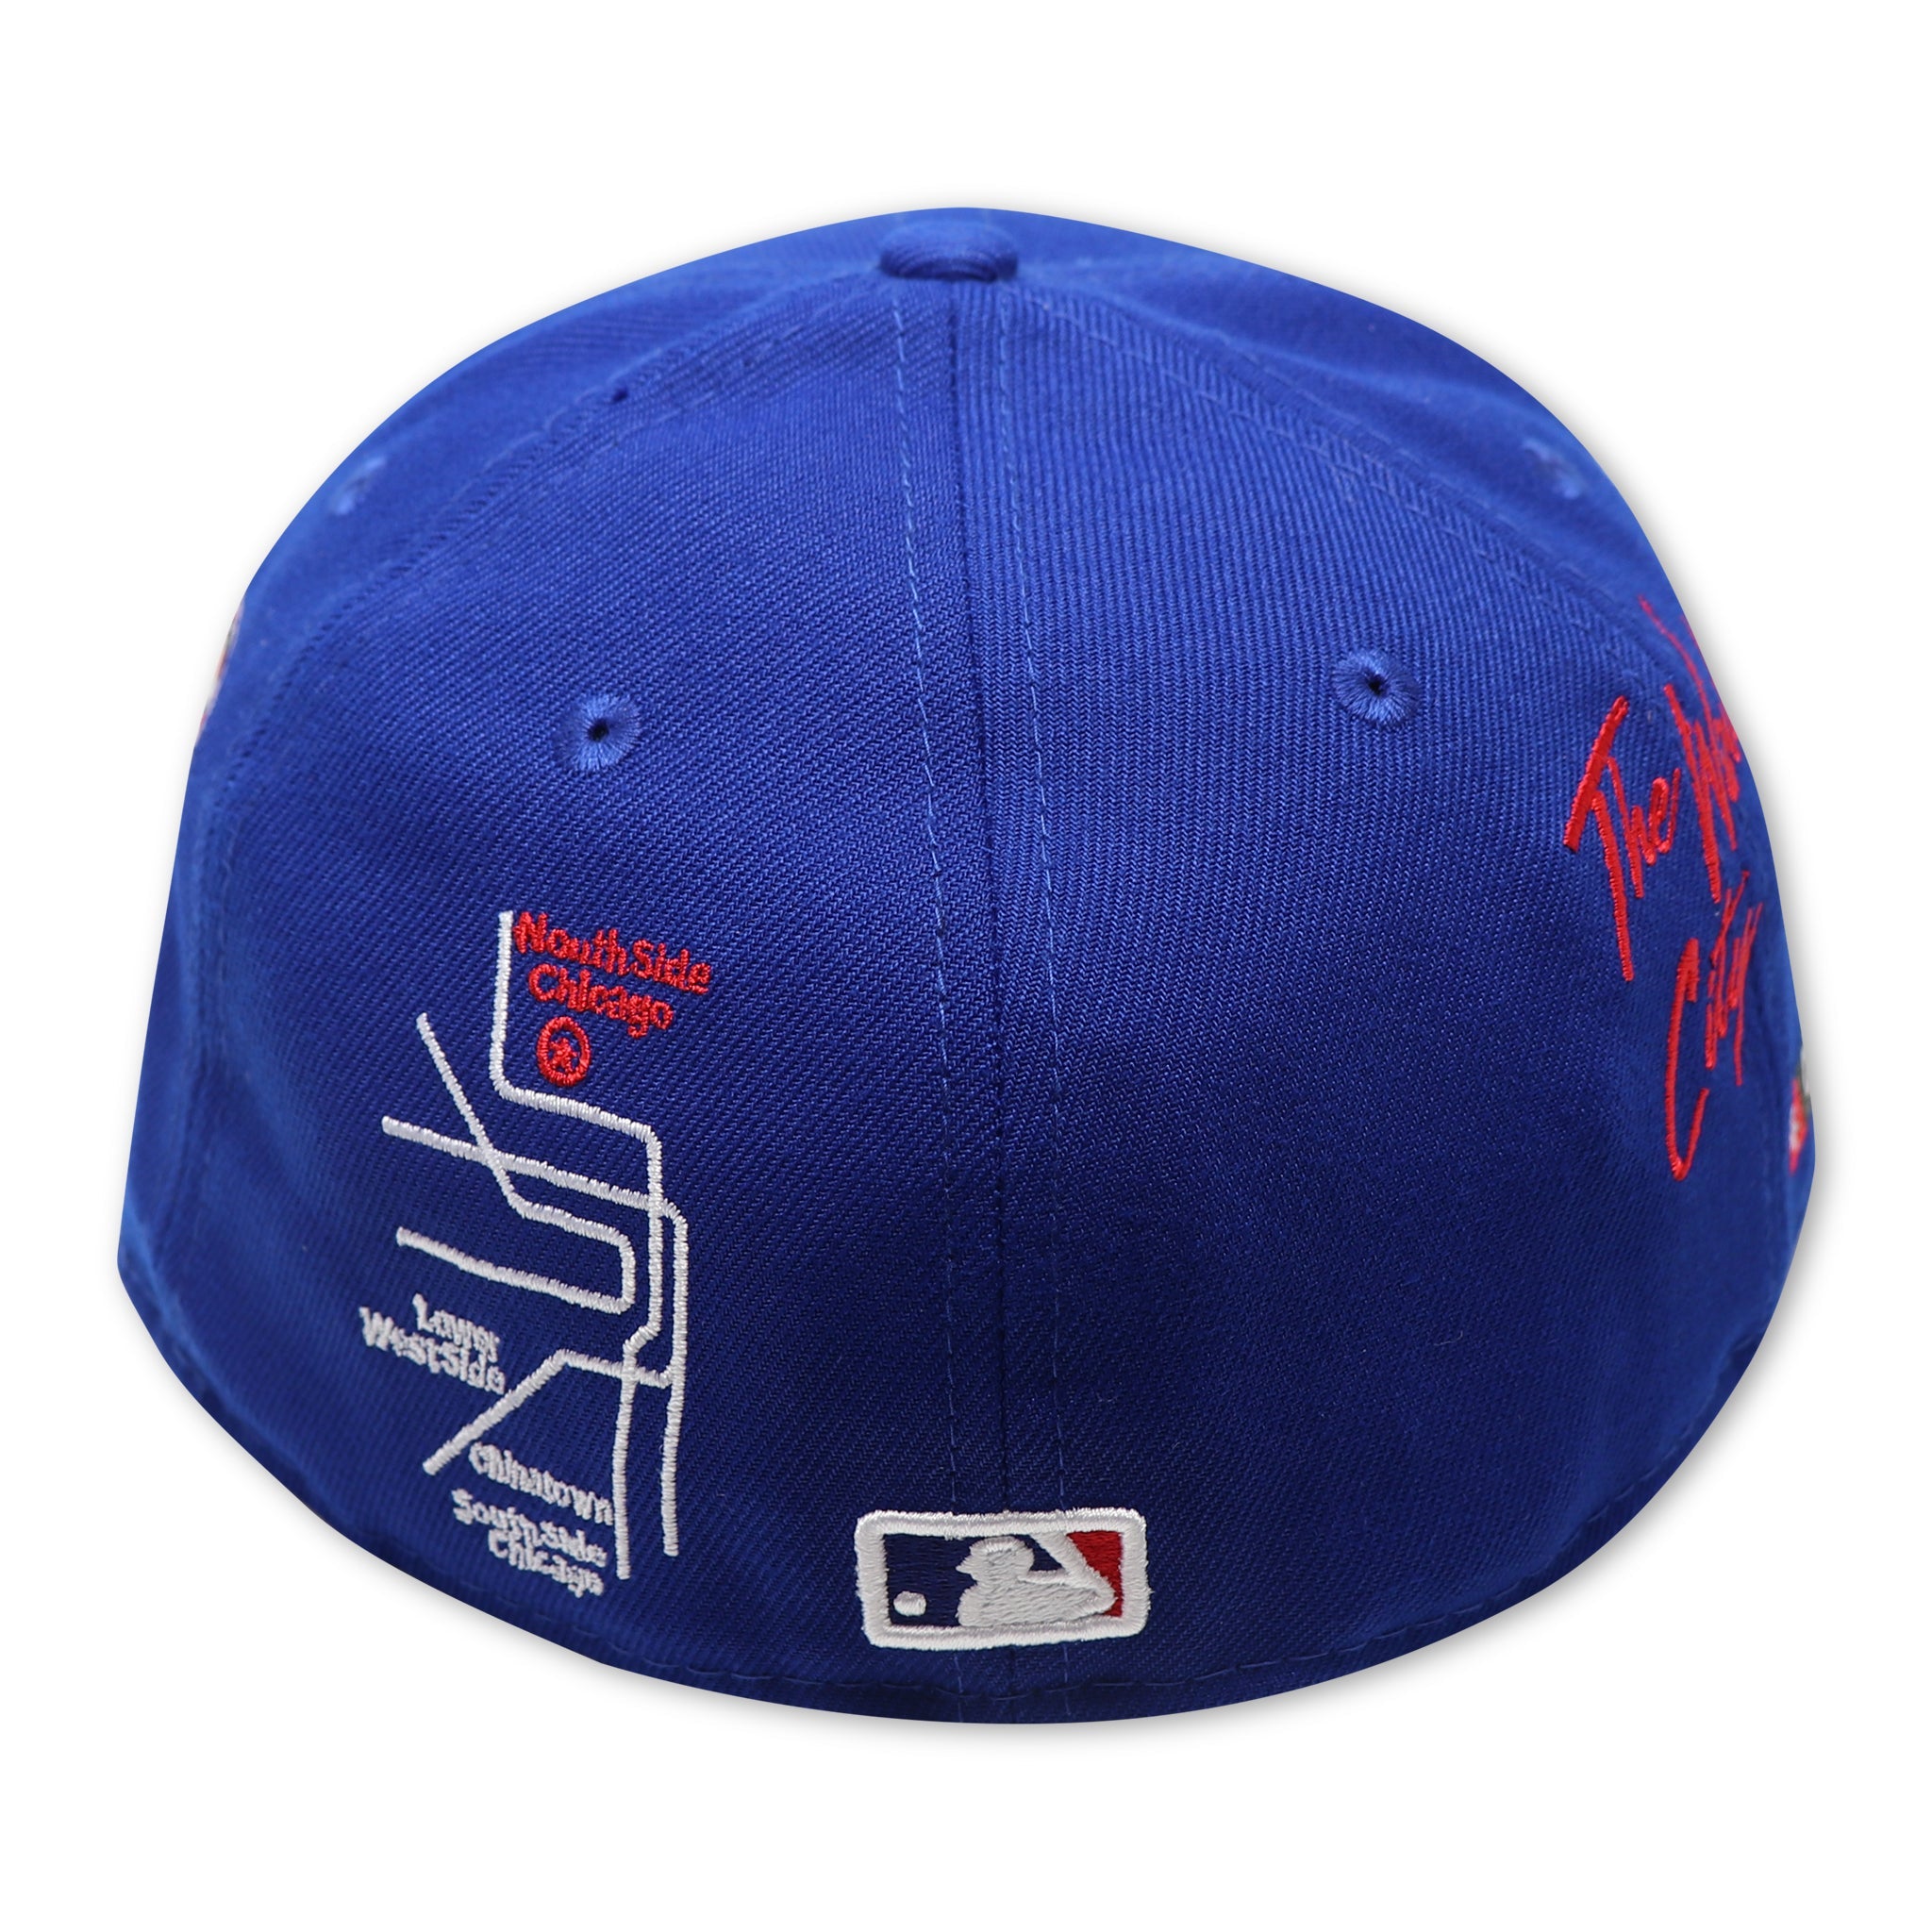 CHICAGO CUBS (CITY TRANSIT) NEW ERA 59FIFTY FITTED